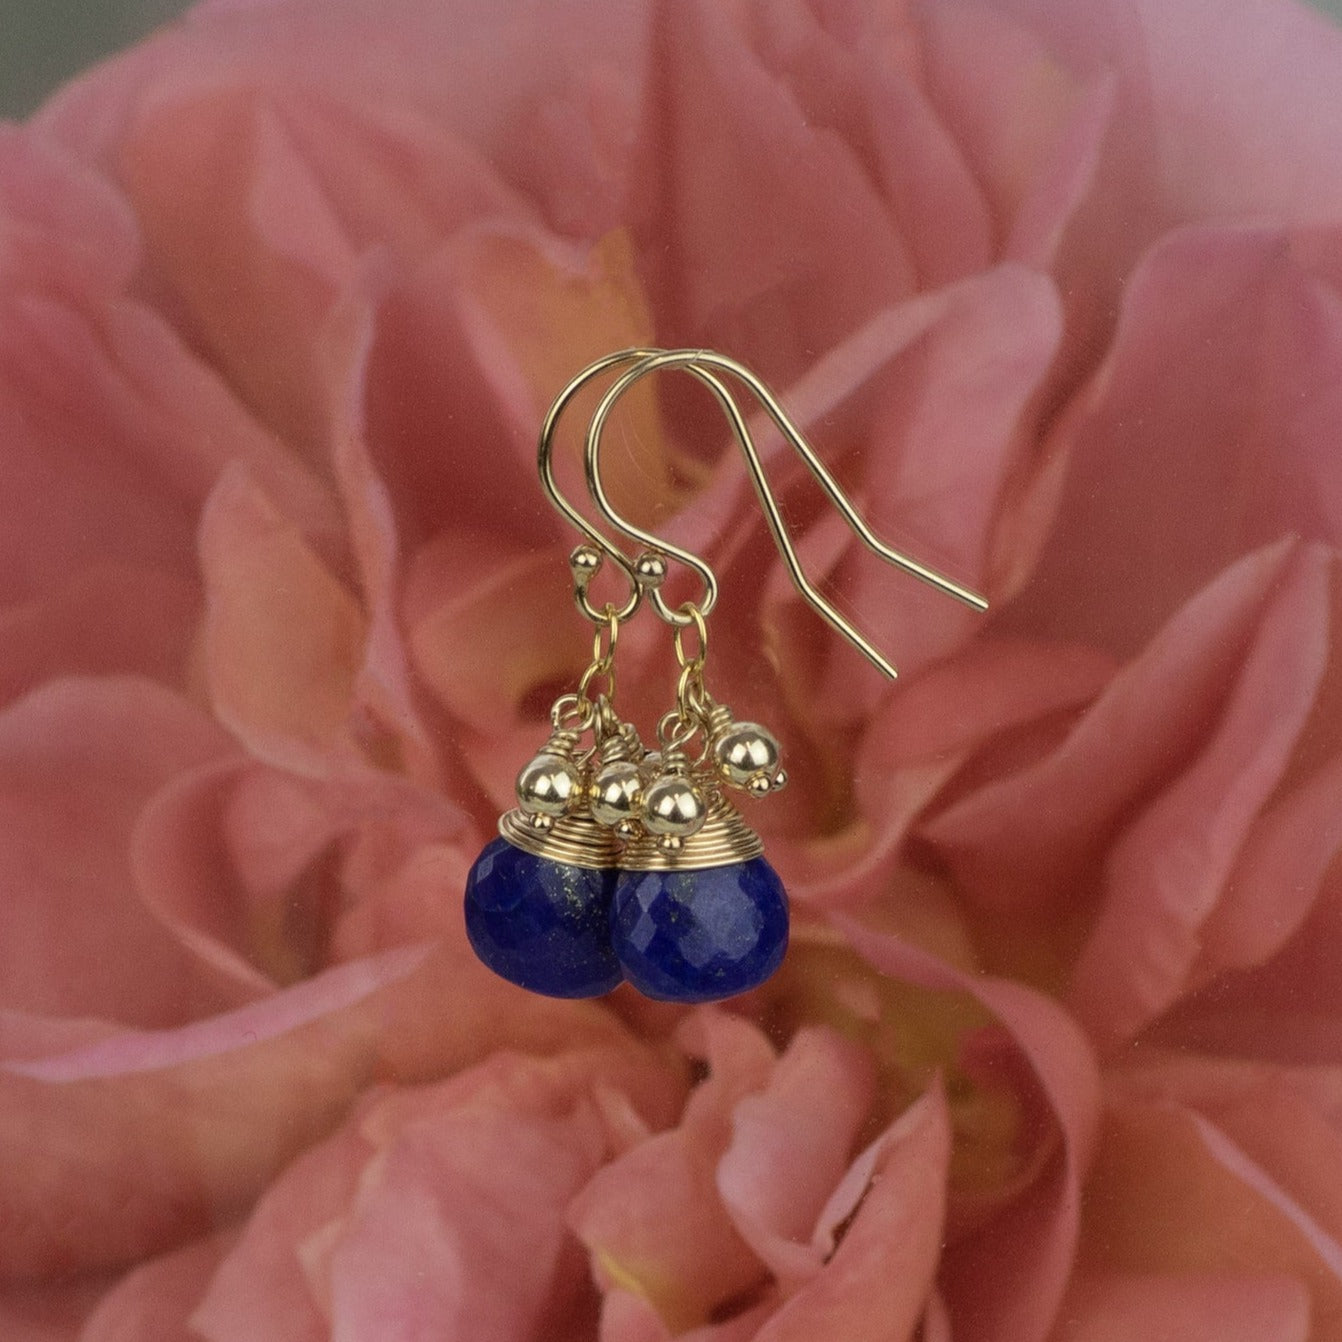 Lapis Earrings - Courage - Silver & Gold